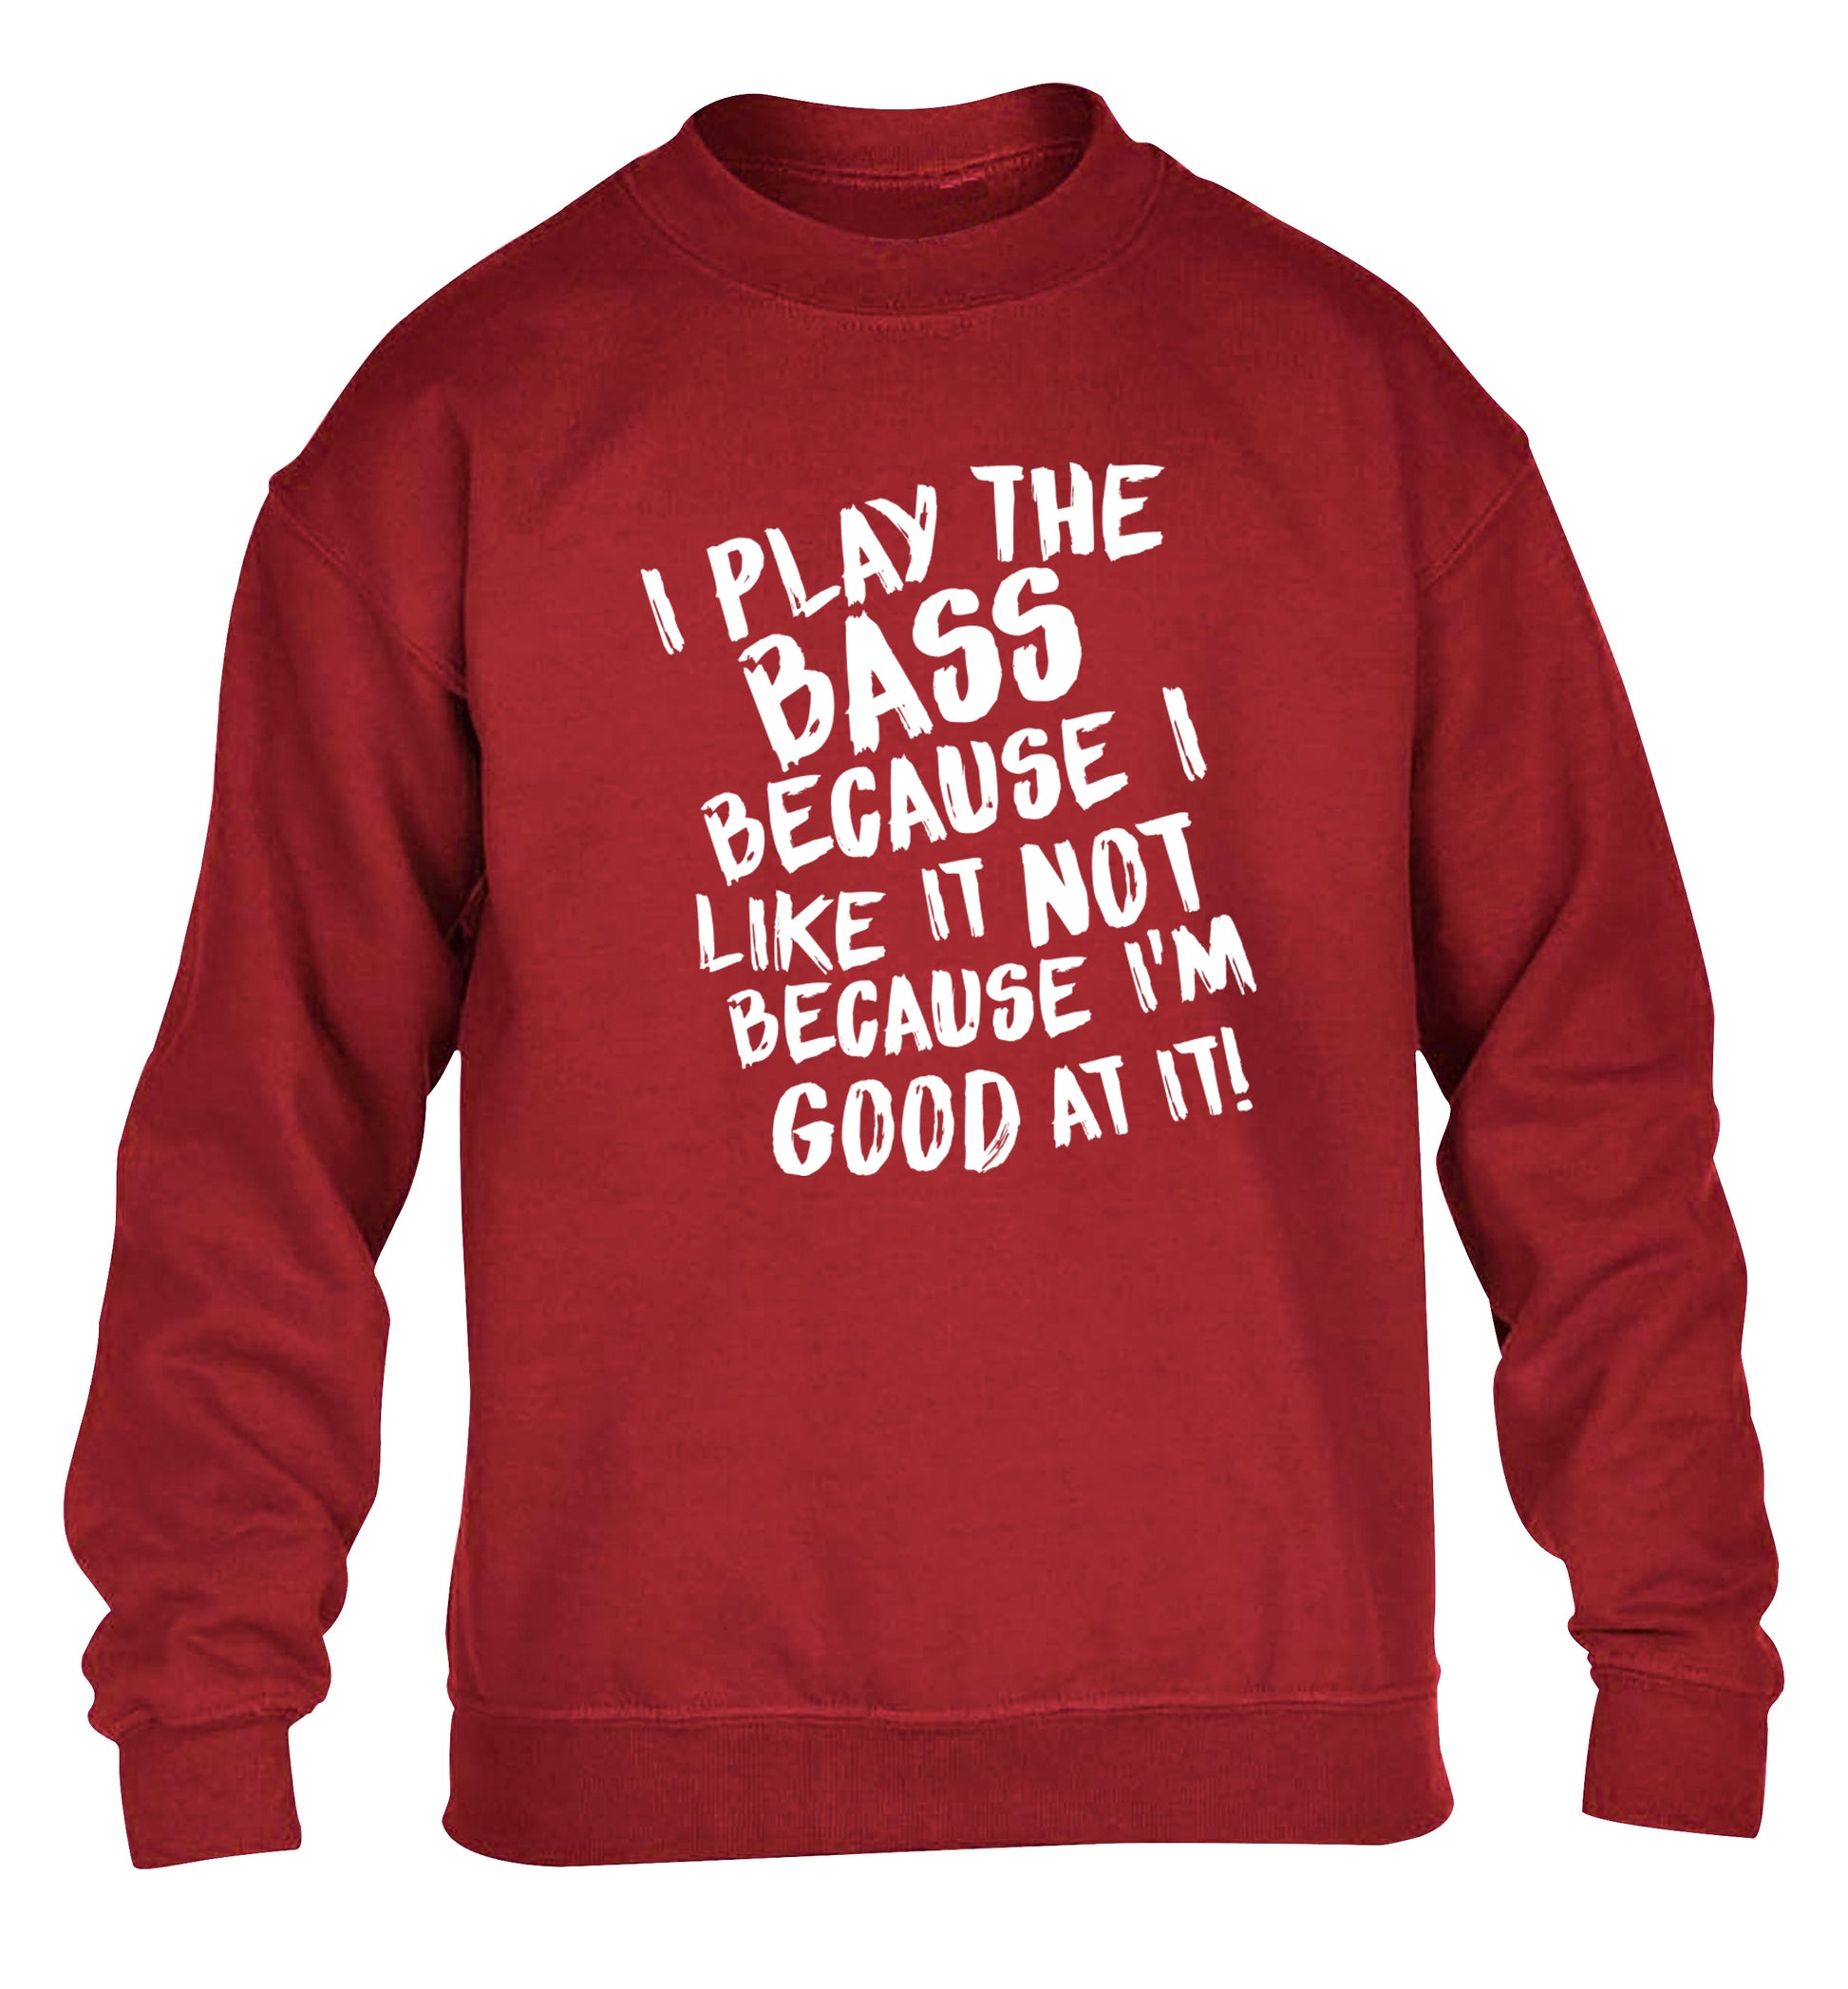 I play the bass because I like it not because I'm good at it children's grey sweater 12-14 Years